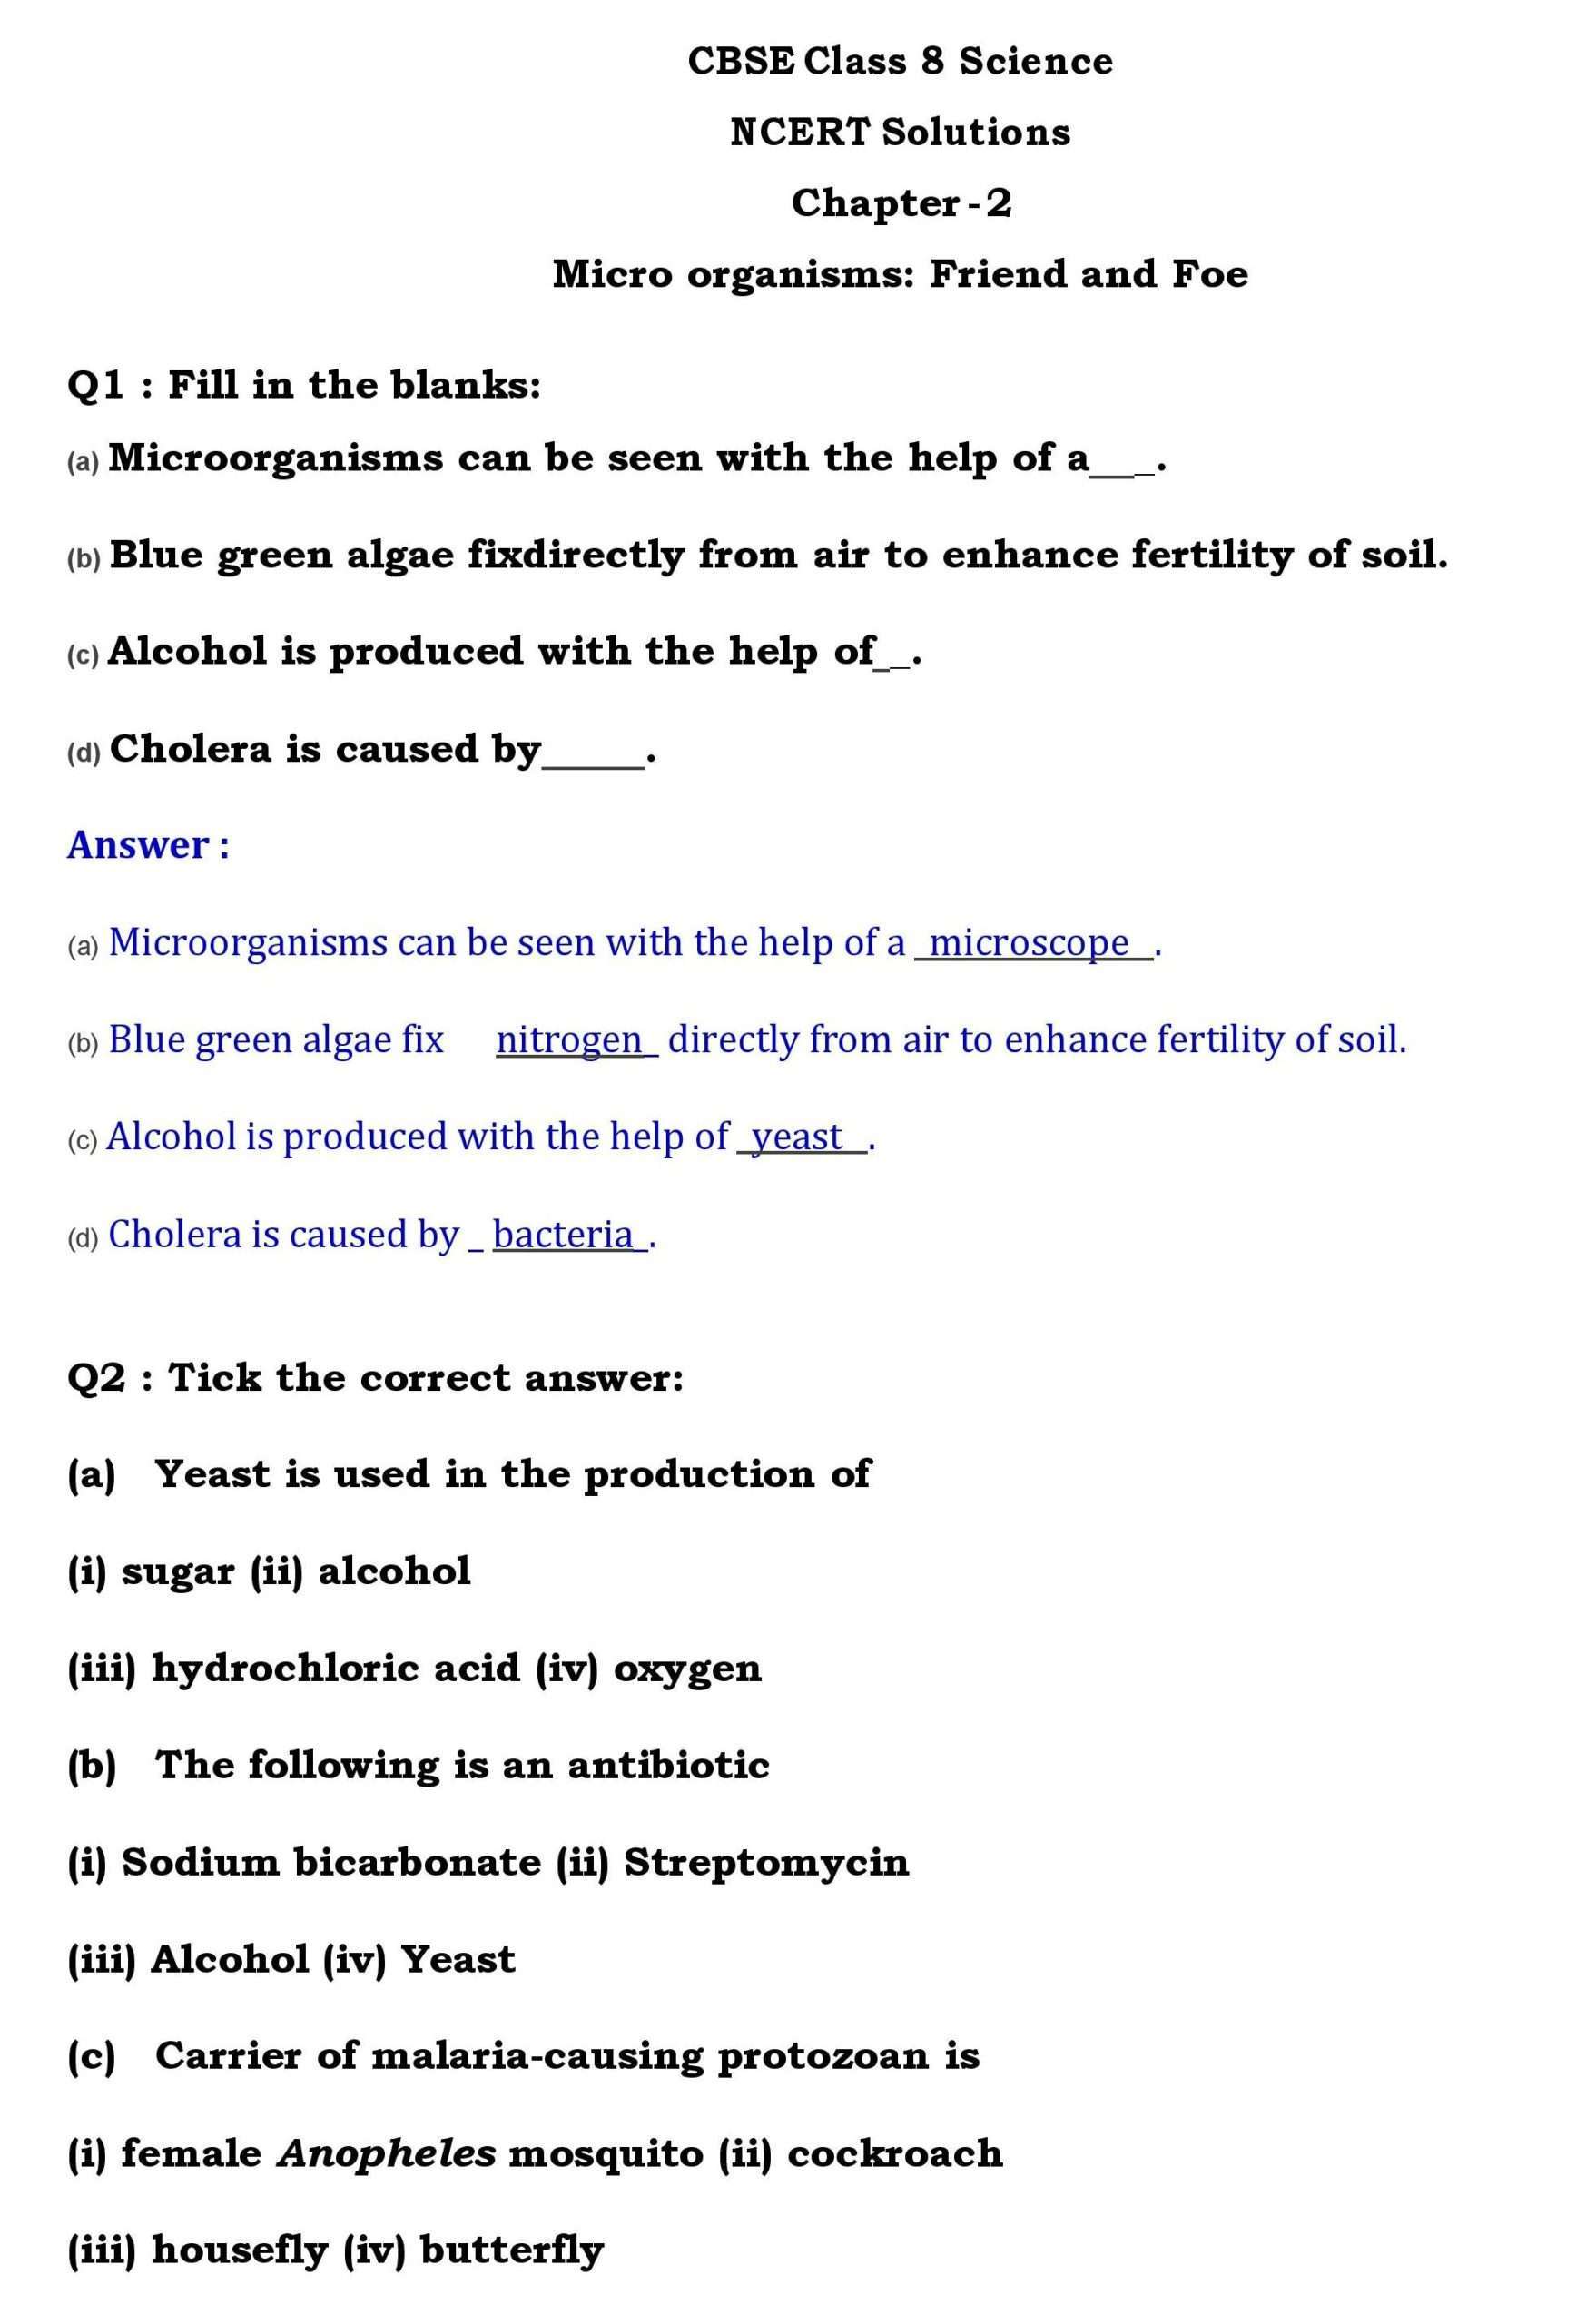 NCERT Solutions for Class 8 Science Chapter 2 page 001 scaled